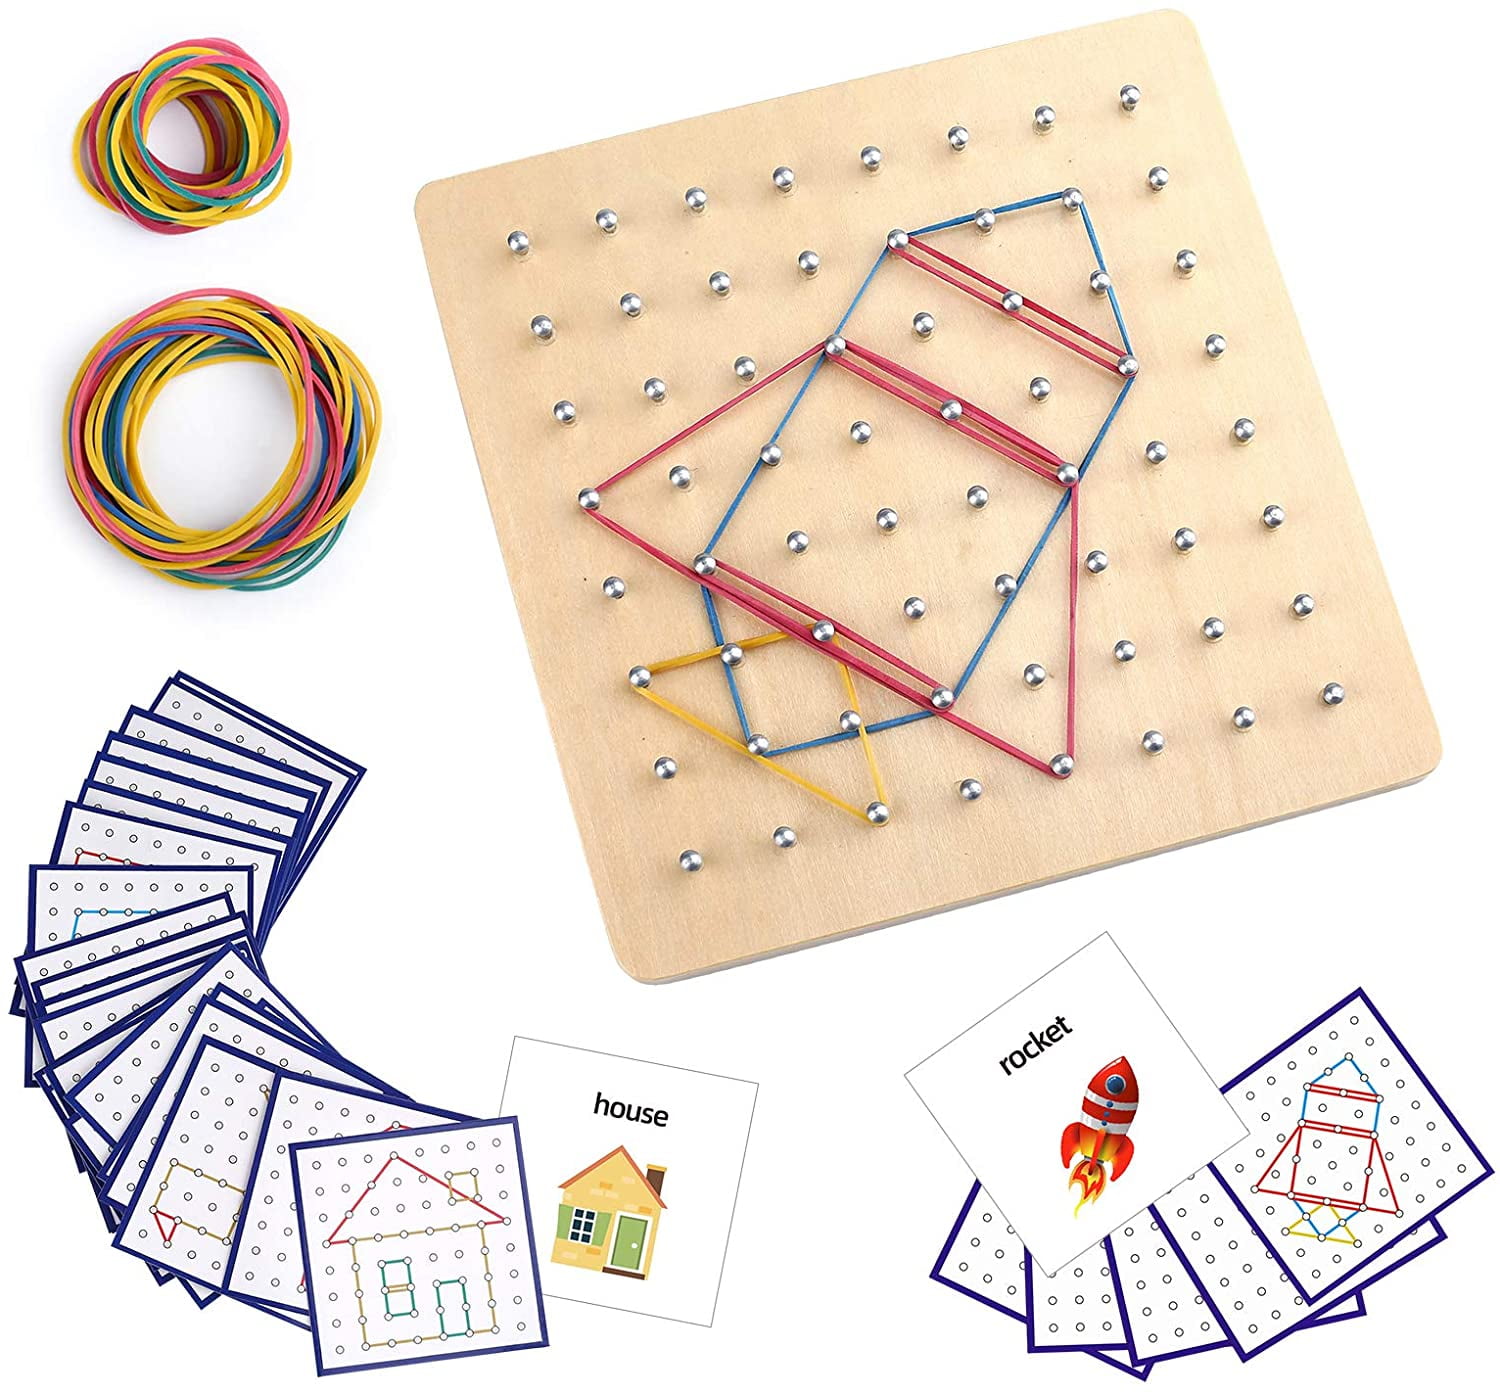 Great Choice Products 6 Pack Double-Sided Geoboard Mathematical  Manipulative Material Array Block Geo Board, Educational